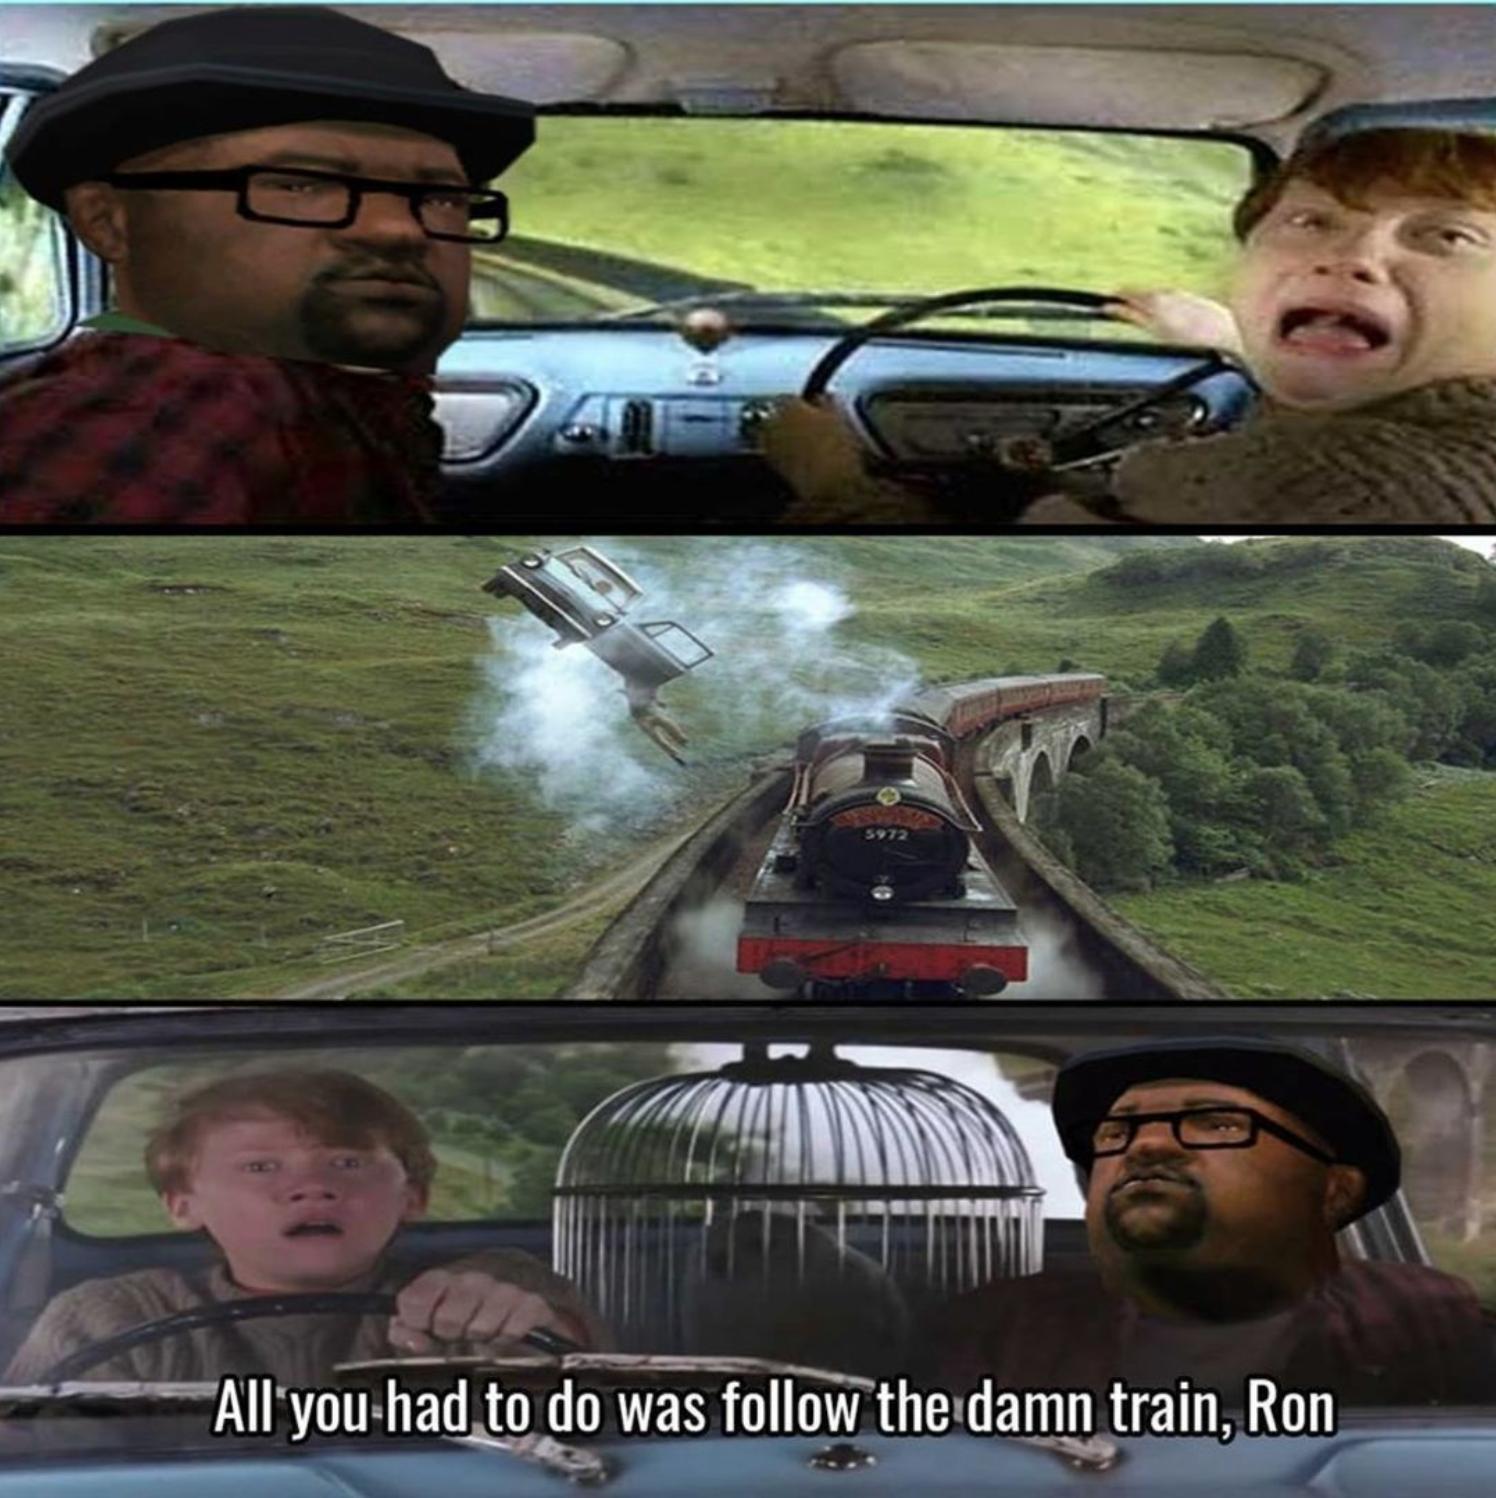 funny gaming memes - all you had to do was follow - All you had to do was the damn train, Ron